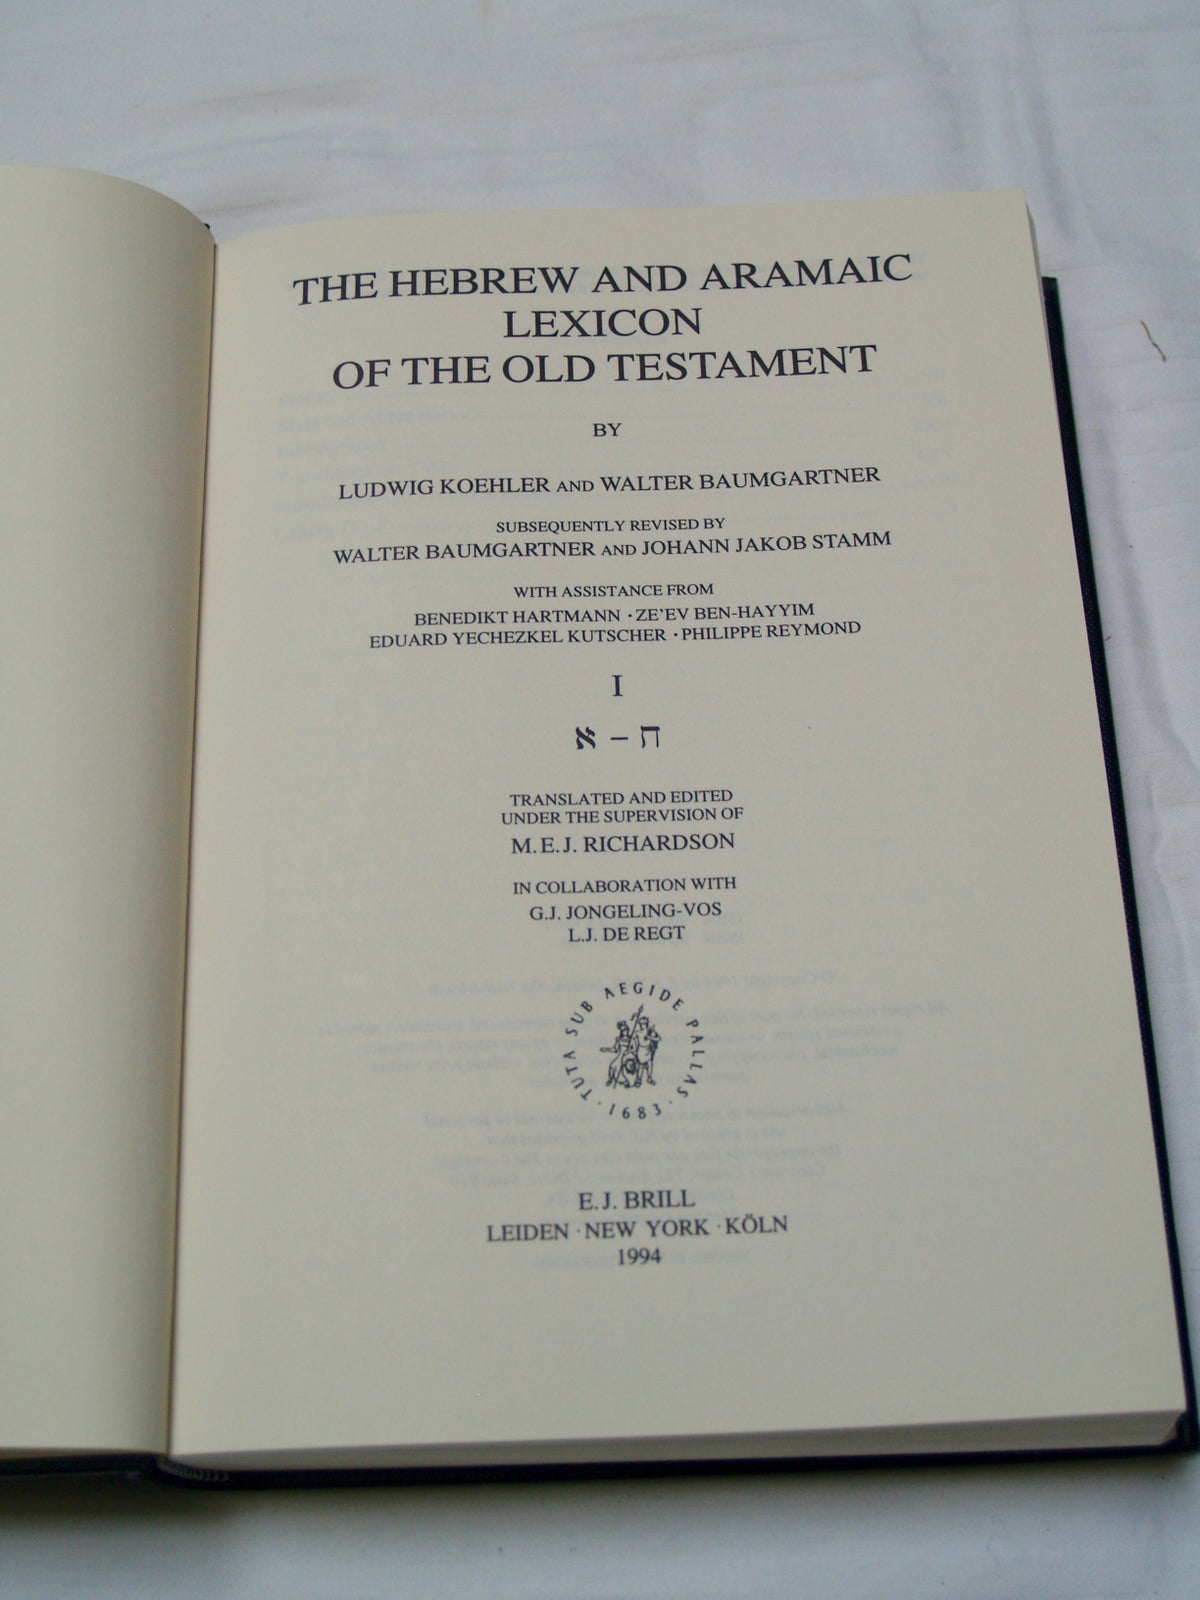 The Hebrew and Aramaic, Lexicon of the Old Testament